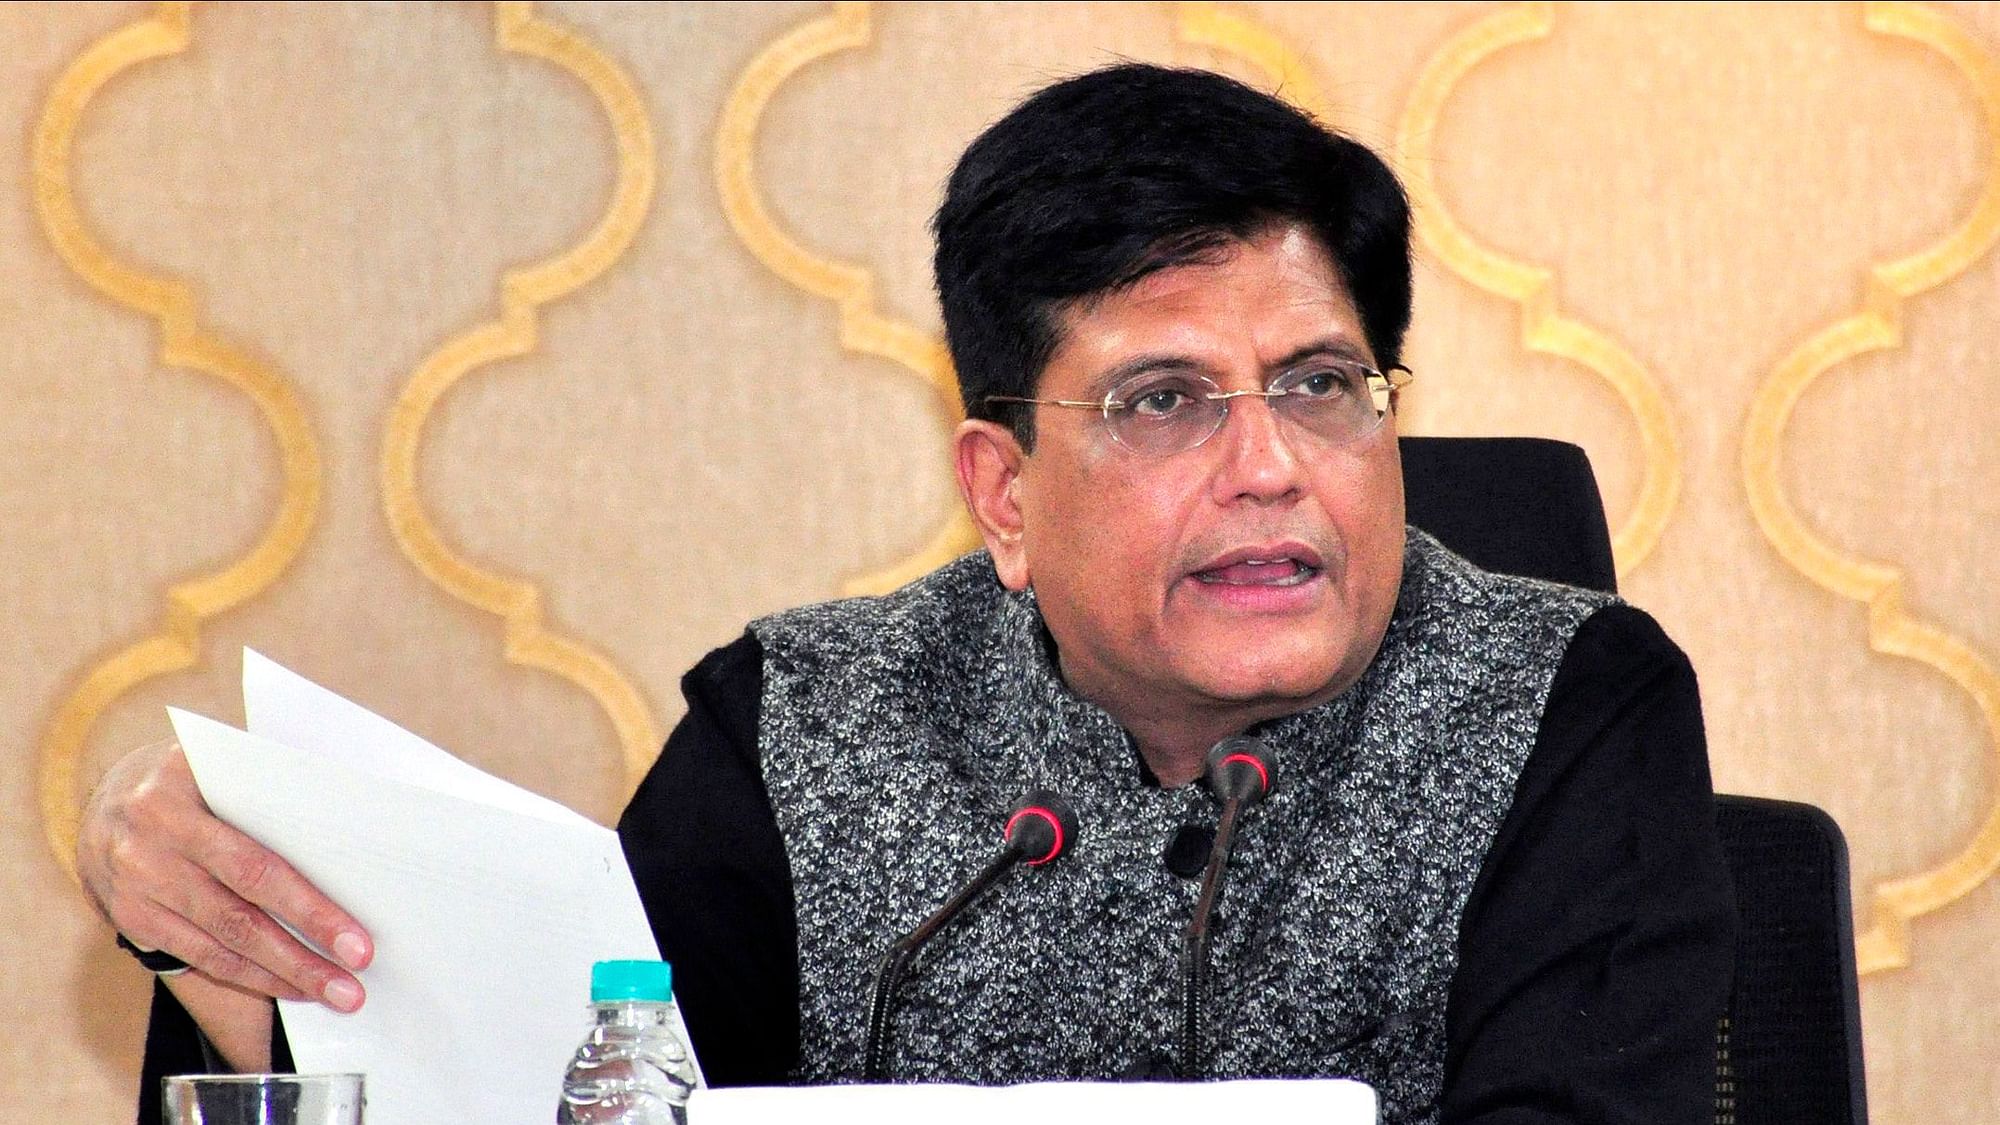 Union Minister for Railways Piyush Goyal addressing a press conference in New Delhi on Wednesday, 23 January.